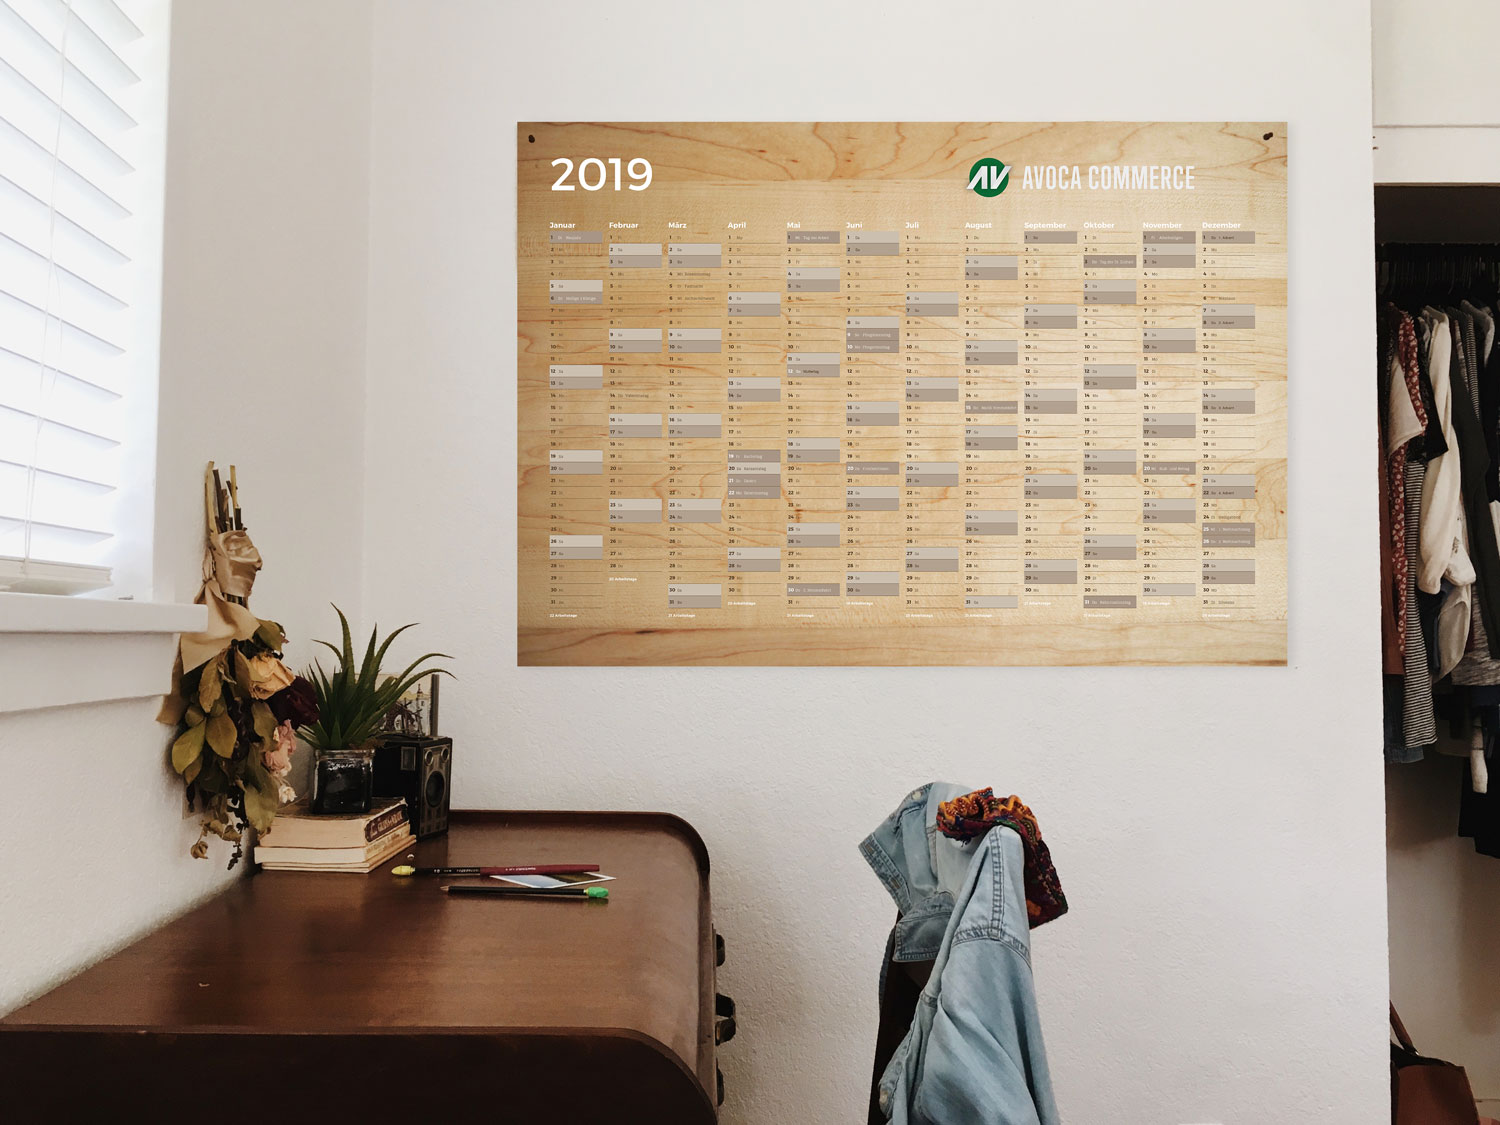 Year-round wall planner in German language. It was set in four colours and contains daily figures and designations as well as the number of working days per month.